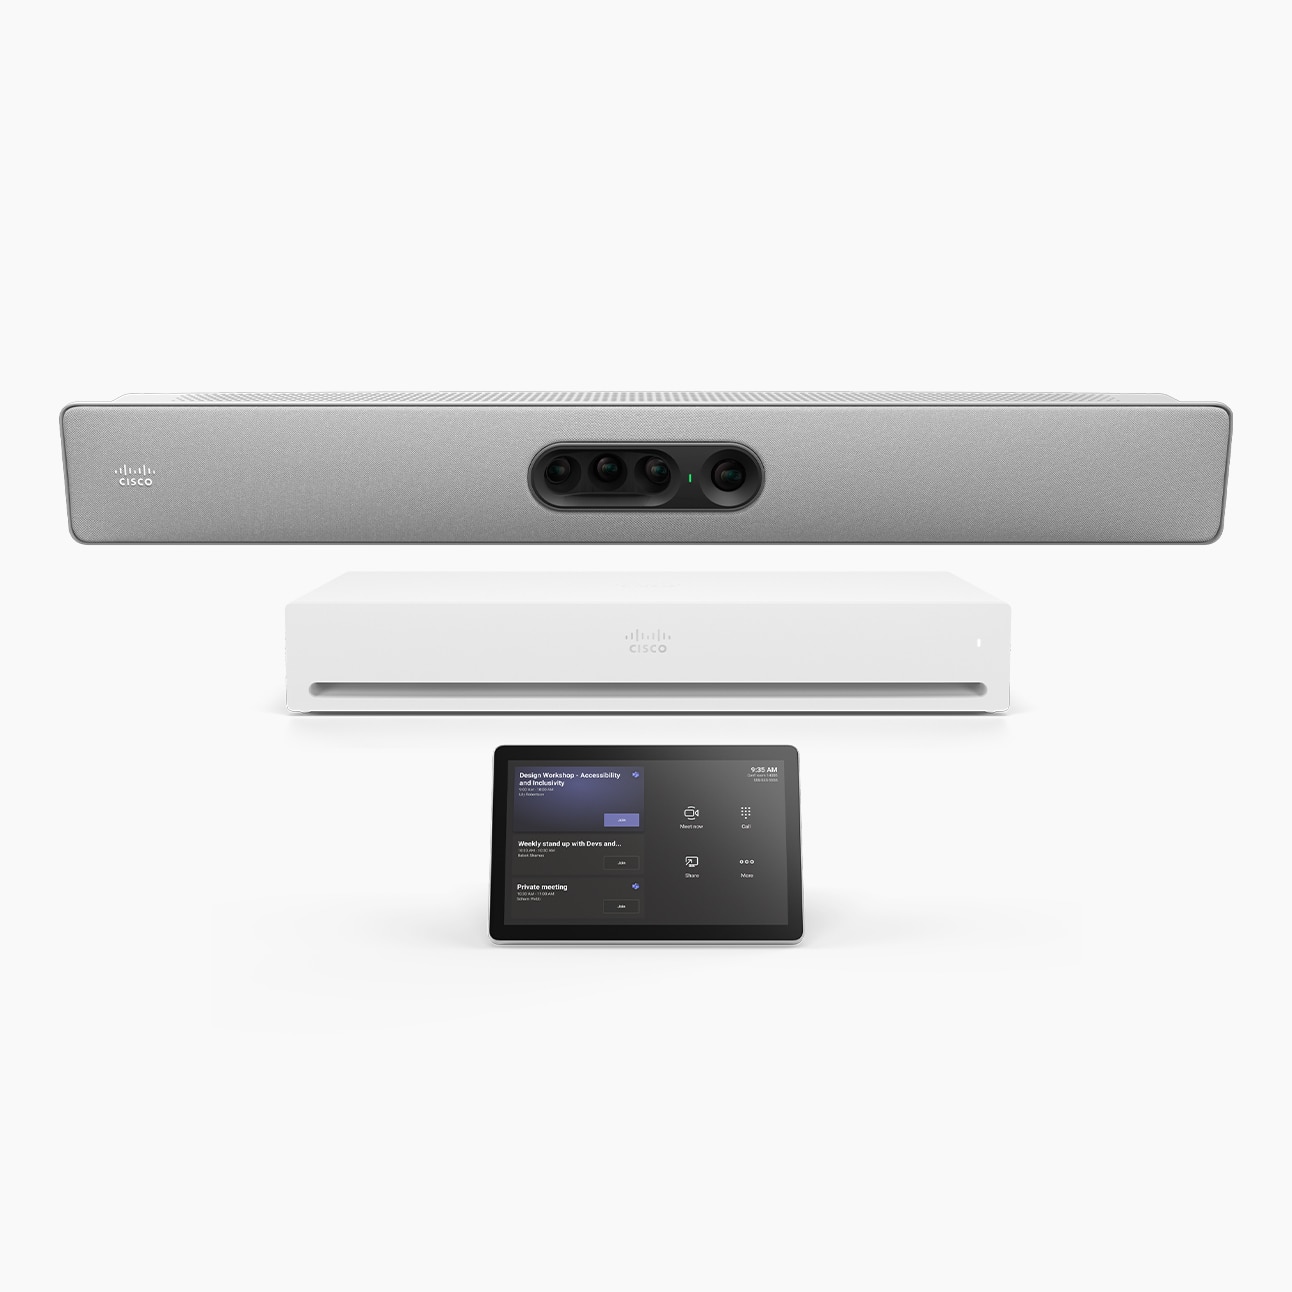 Cisco Room Kit Pro with the Quad Camera video bar, Codec Pro, and Cisco Room Navigator displaying an upcoming Microsoft Teams meetings.